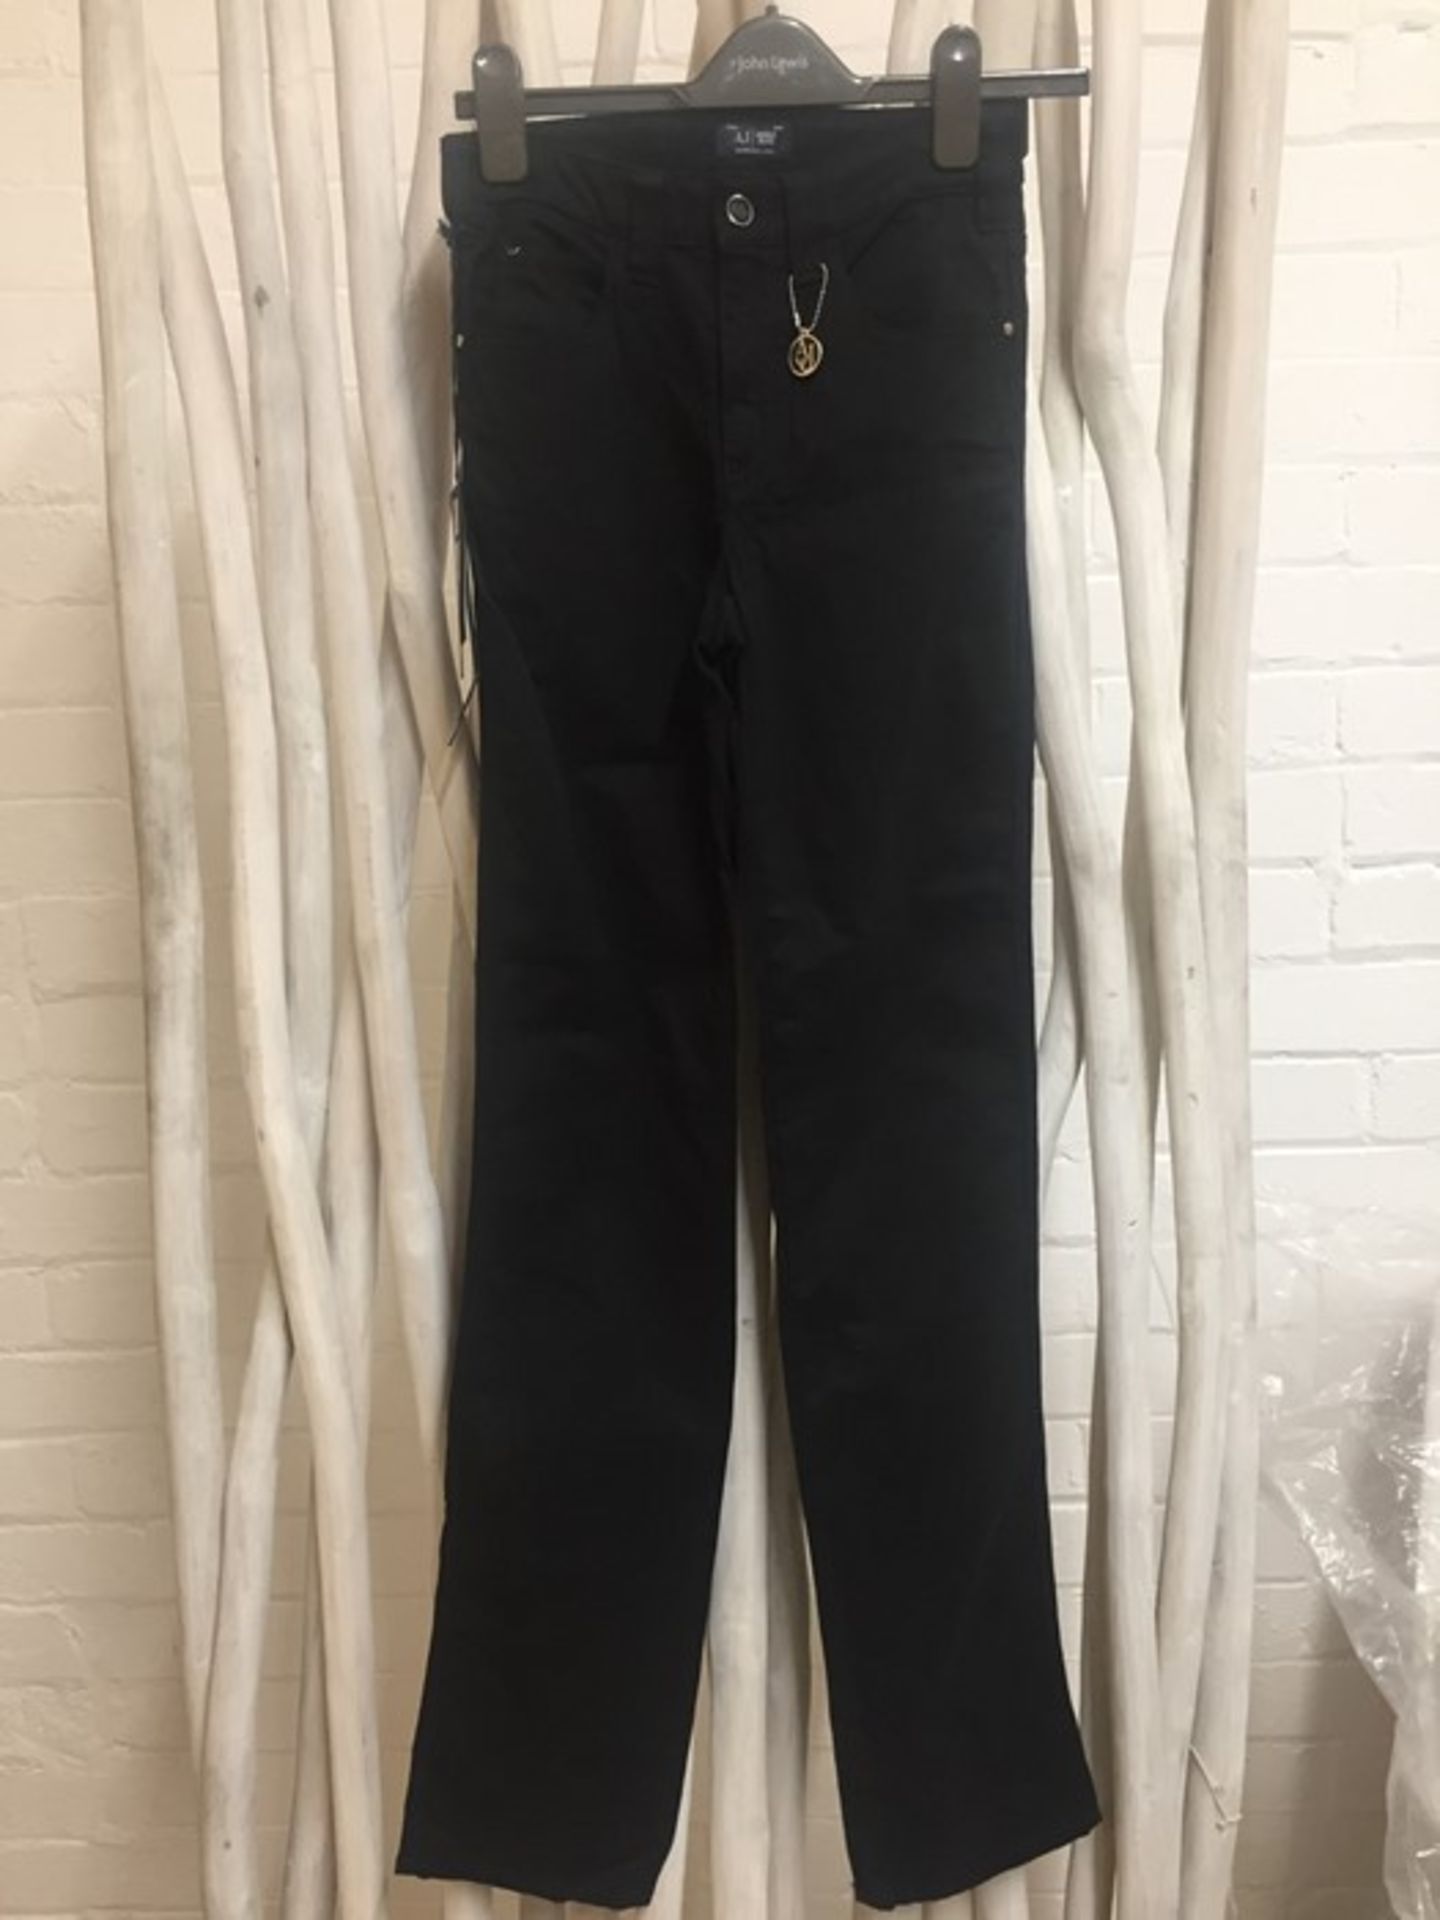 1 ARMANI JEANS REGULAR FIT J75 NERO BLACK JEANS IN W27 / RRP £145.00 (PUBLIC VIEWING AVAILABLE)